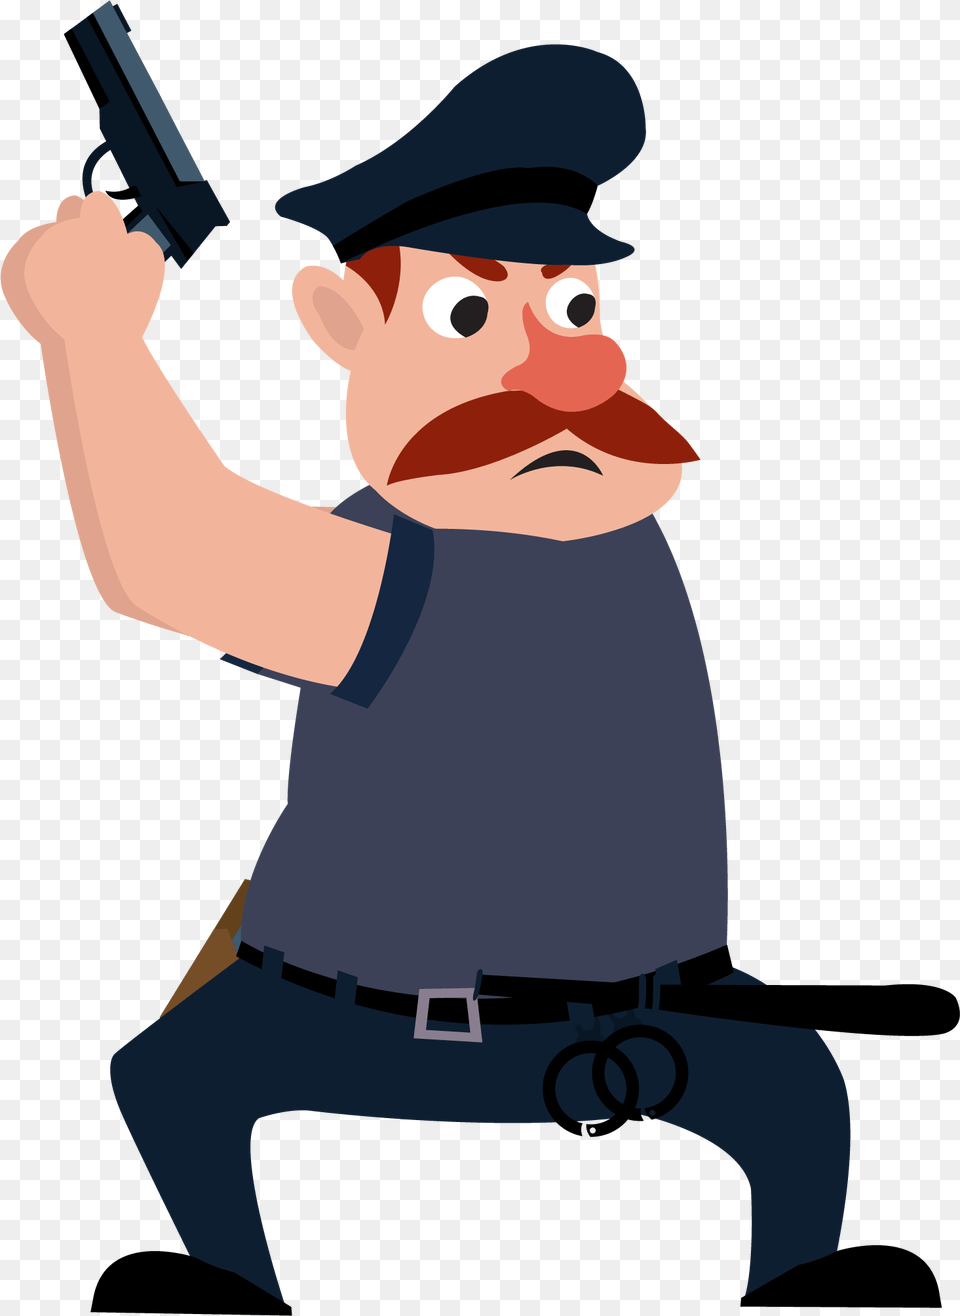 Cartoon Officer Icon Criminal Holding A Gun Cartoon Animated Criminal, Person, People, Weapon, Firearm Free Png